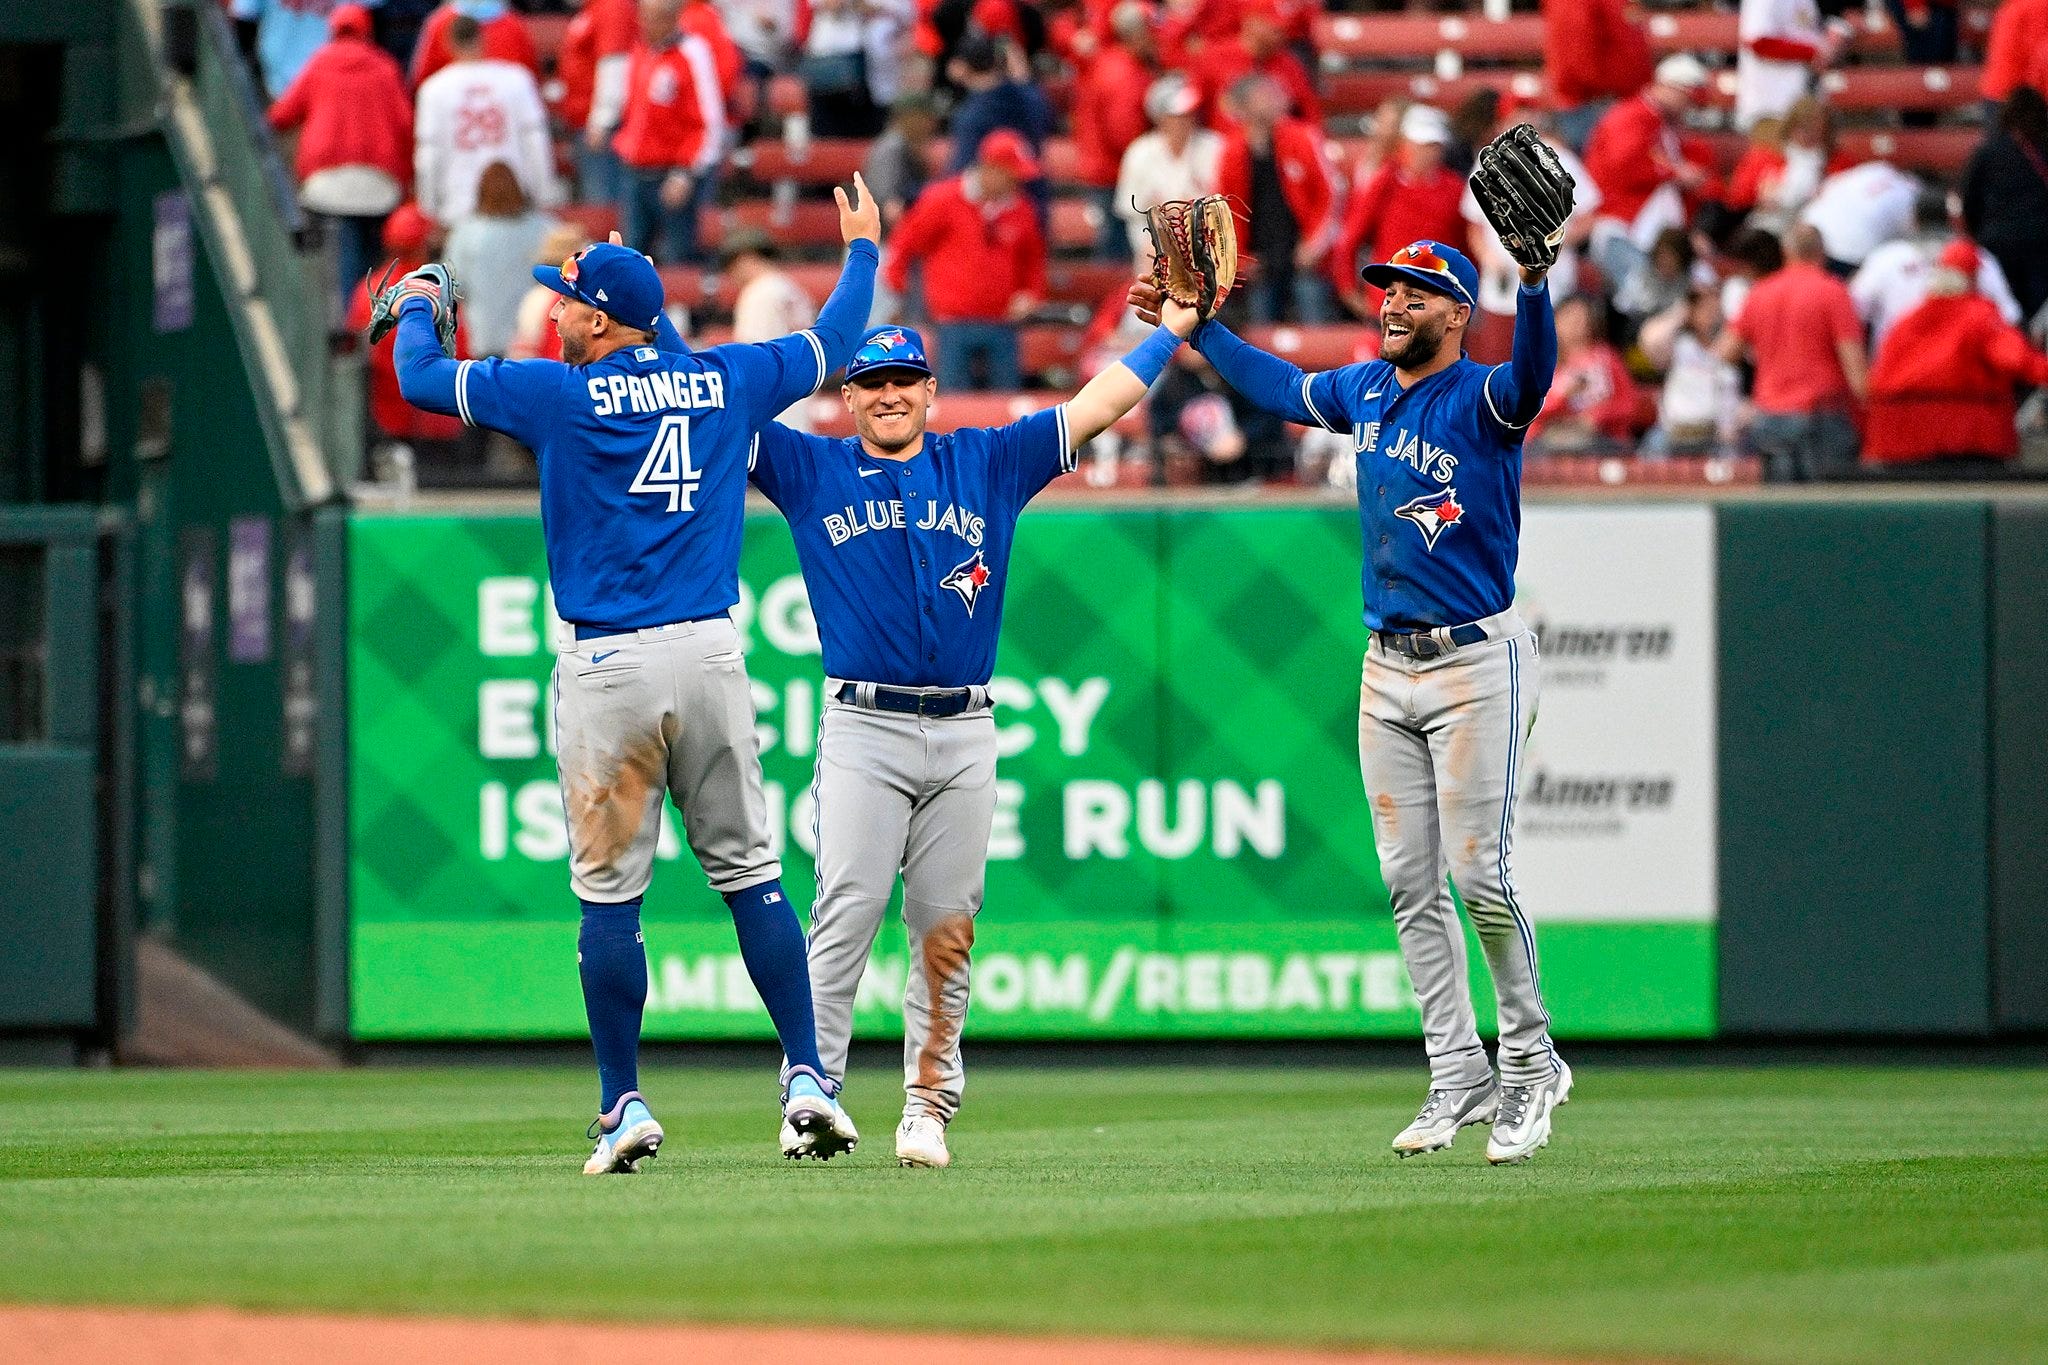 Toronto Blue Jays: Chance of a Regression in 2022?